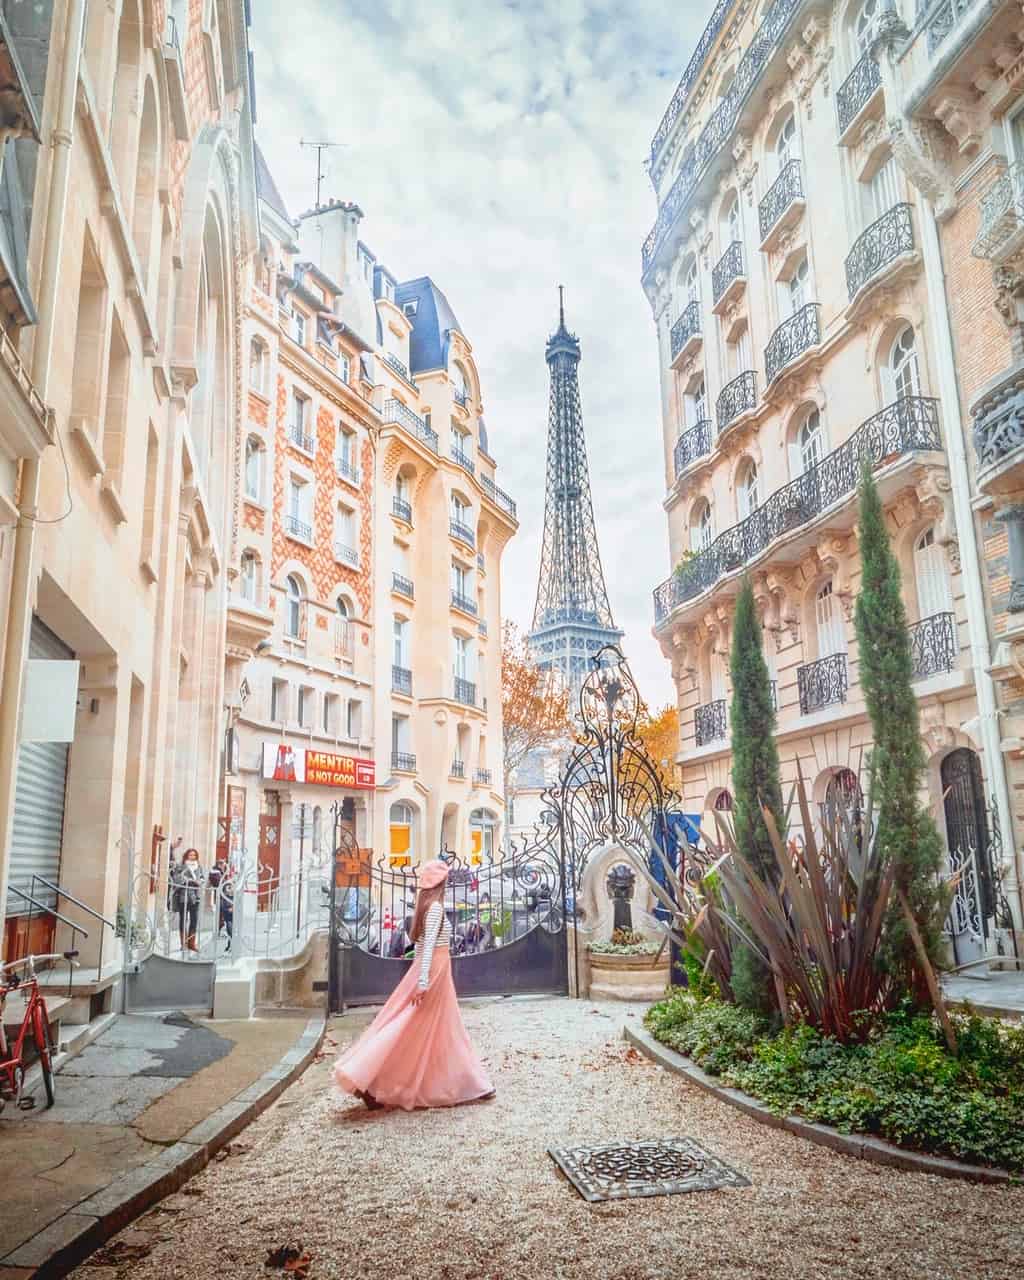 Temperatures and weather for Paris in the spring | Eiffel Tower in Paris and pink Paris fashion | Paris travel tips 